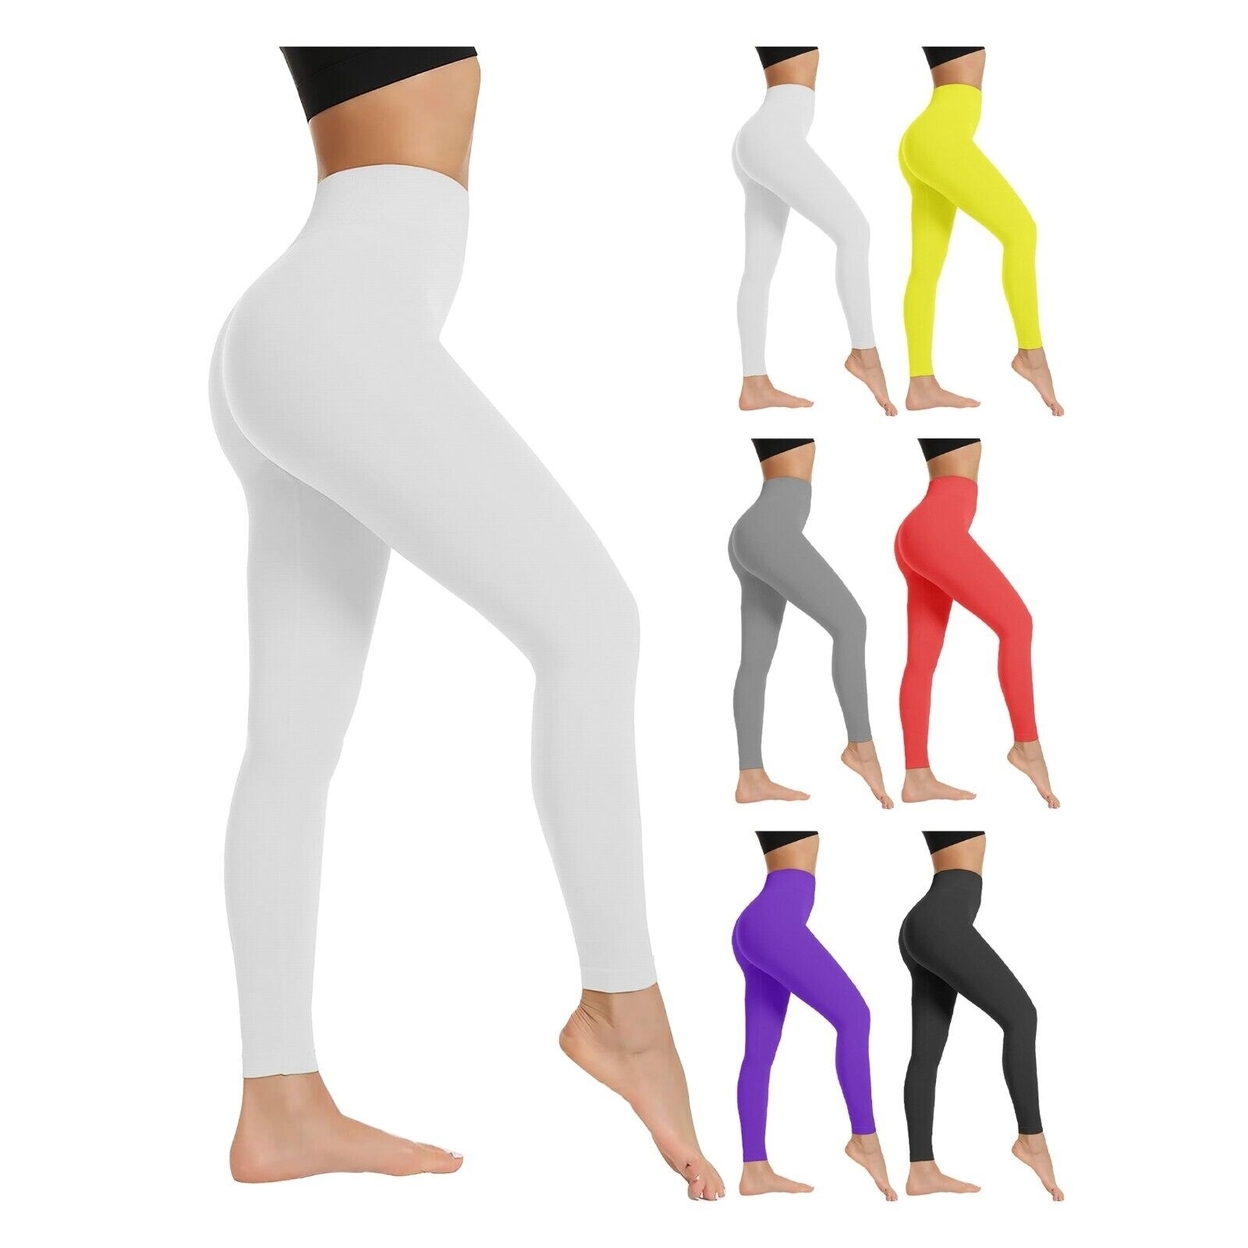 2-Pack: Women's High Waist Super Soft Active Athlete Stretch Yoga Cozy Leggings - Yellow & Red, X-small